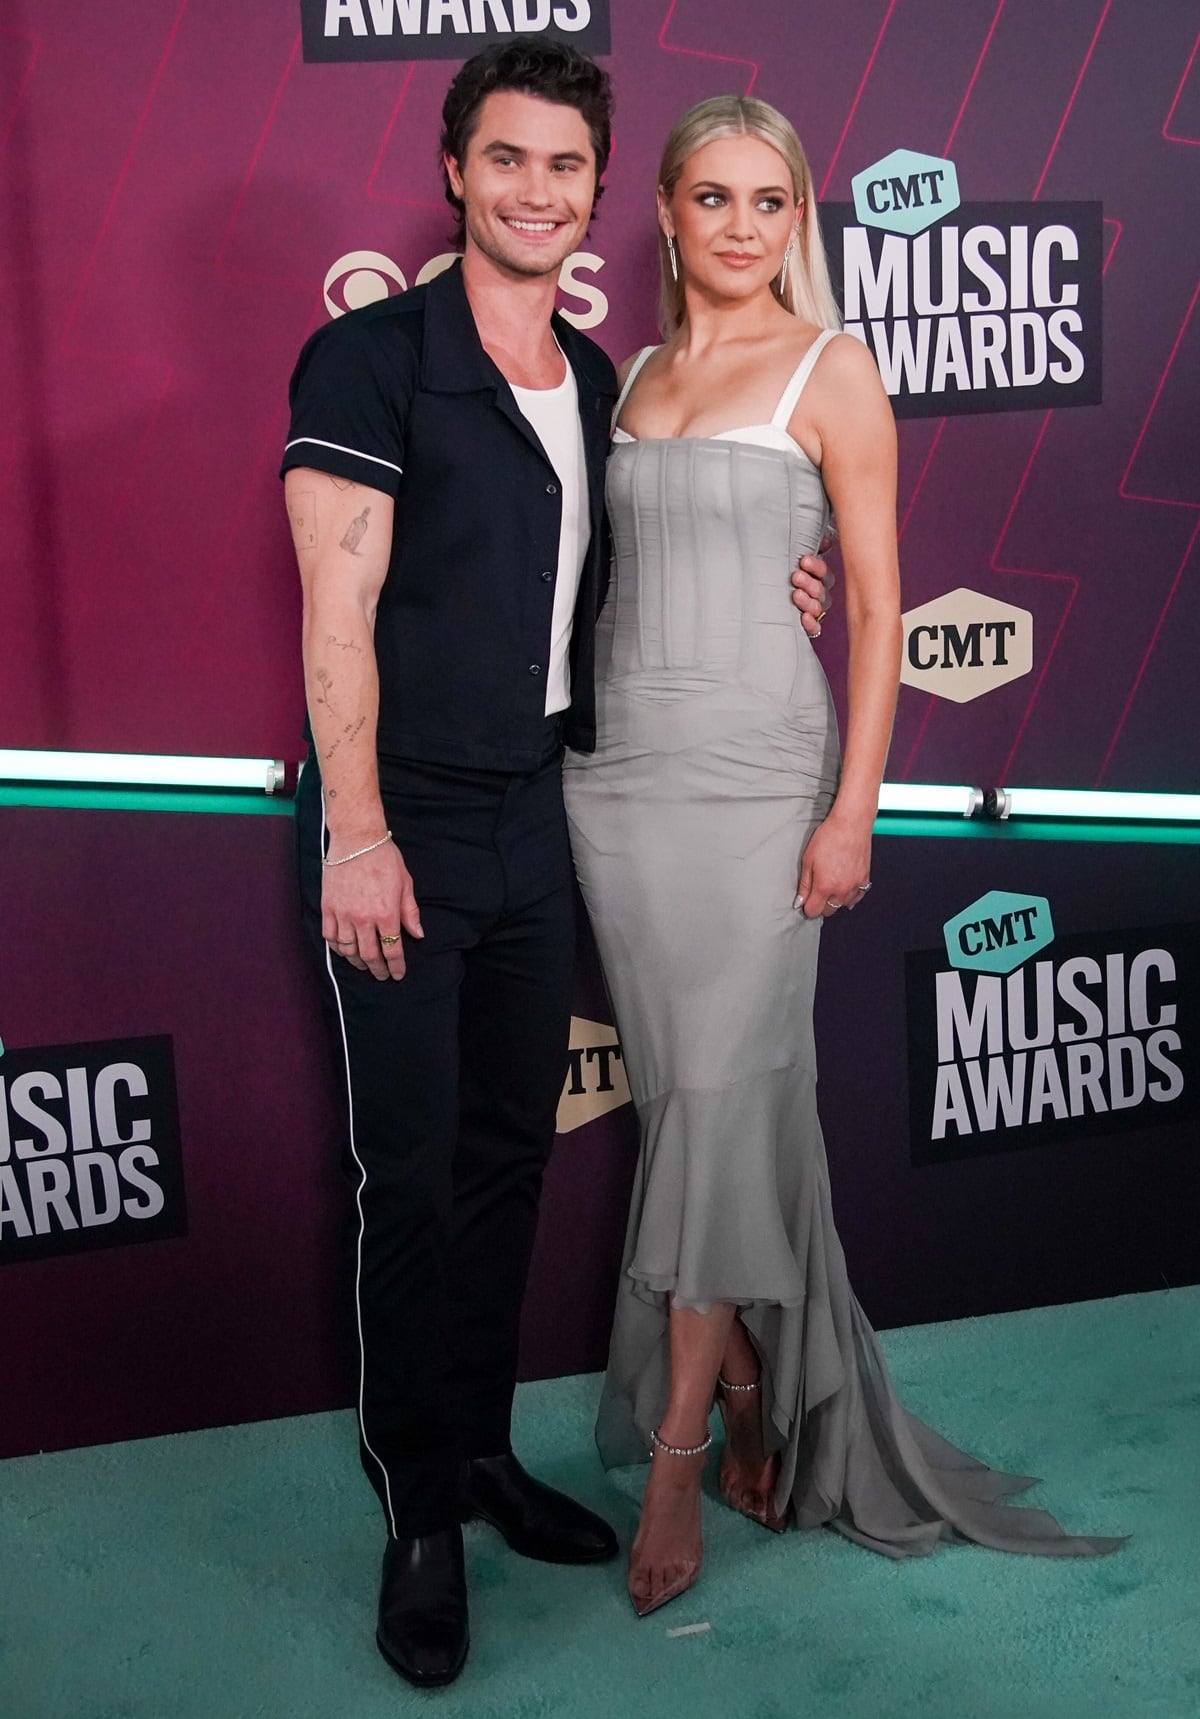 Chase Stokes and Kelsea Ballerini made their red carpet debut